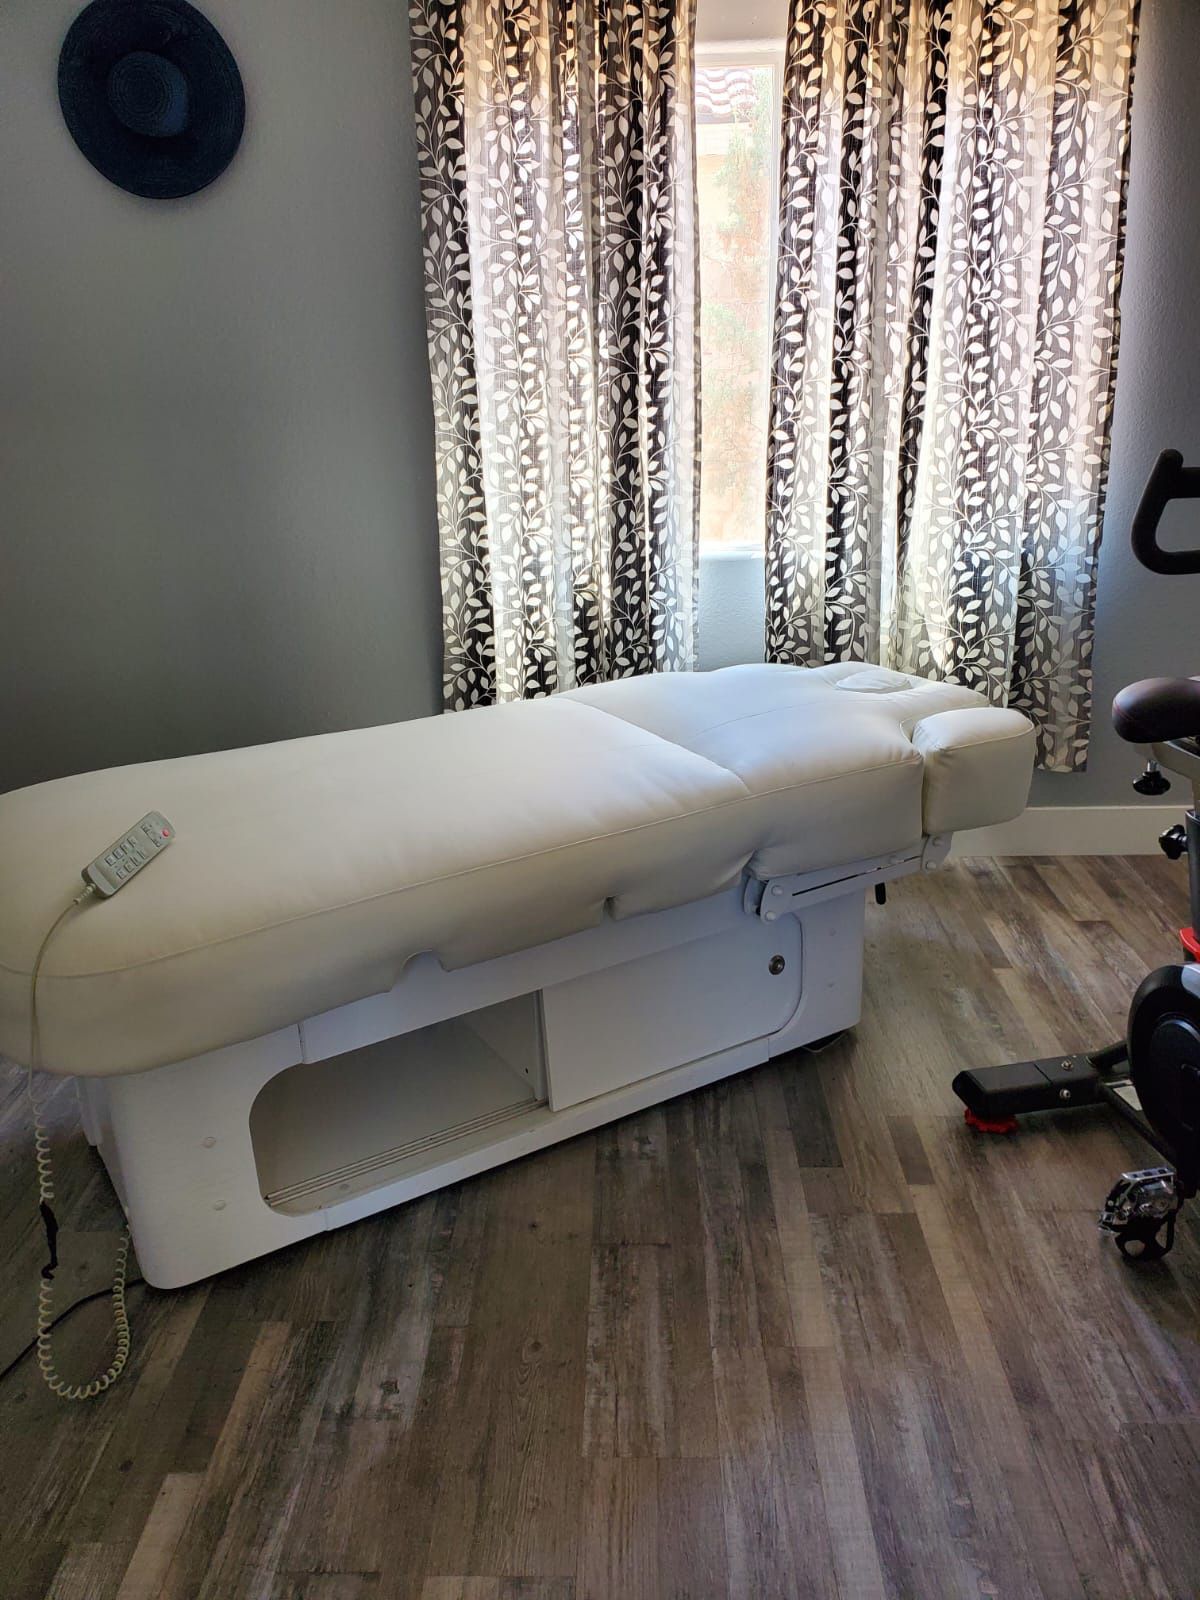 Electric Facial/Massage Bed